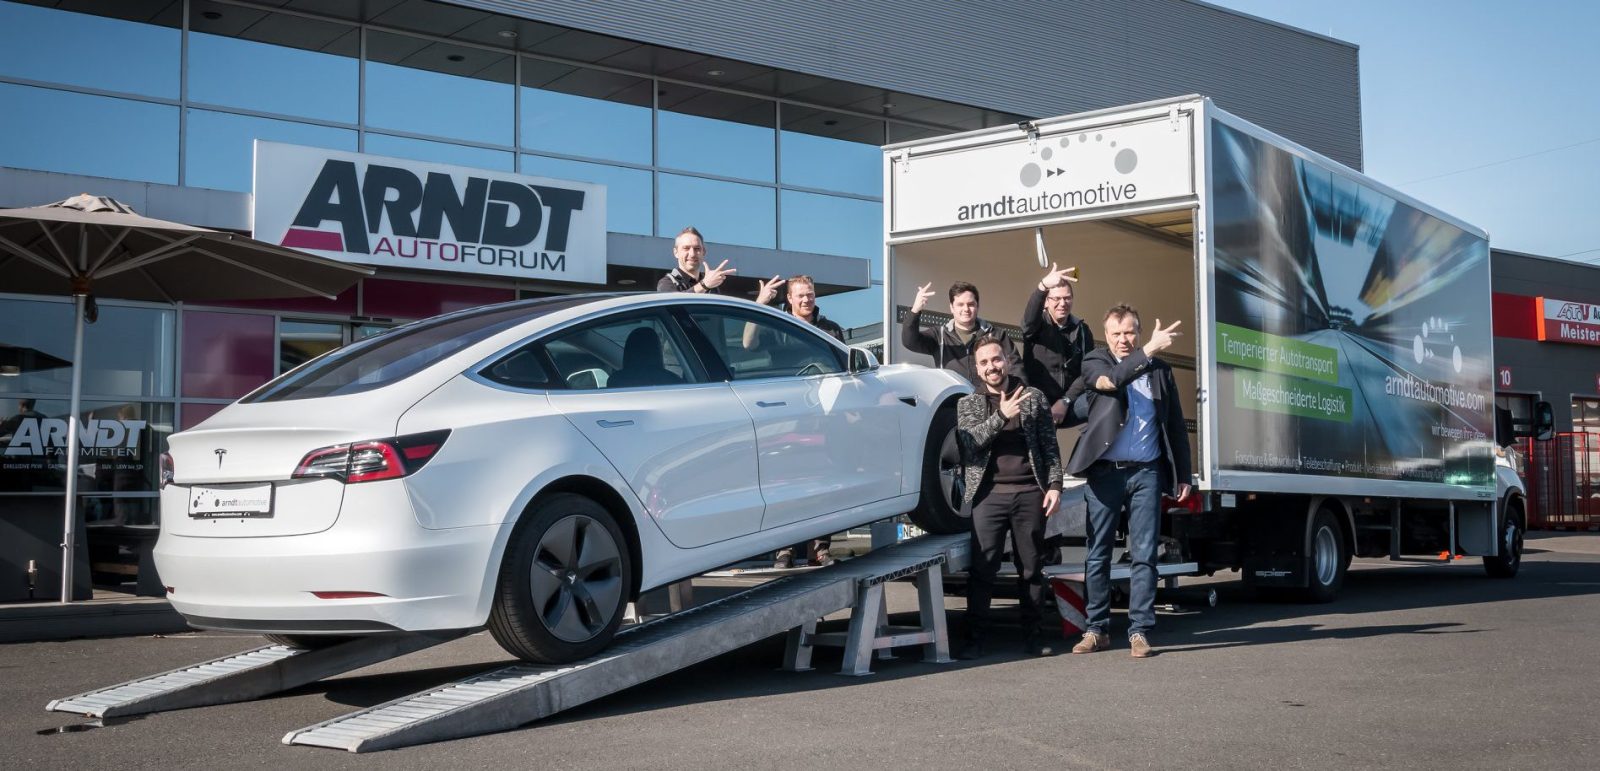 Tesla Model 3 vehicles get imported in Germany for a fleet of rental